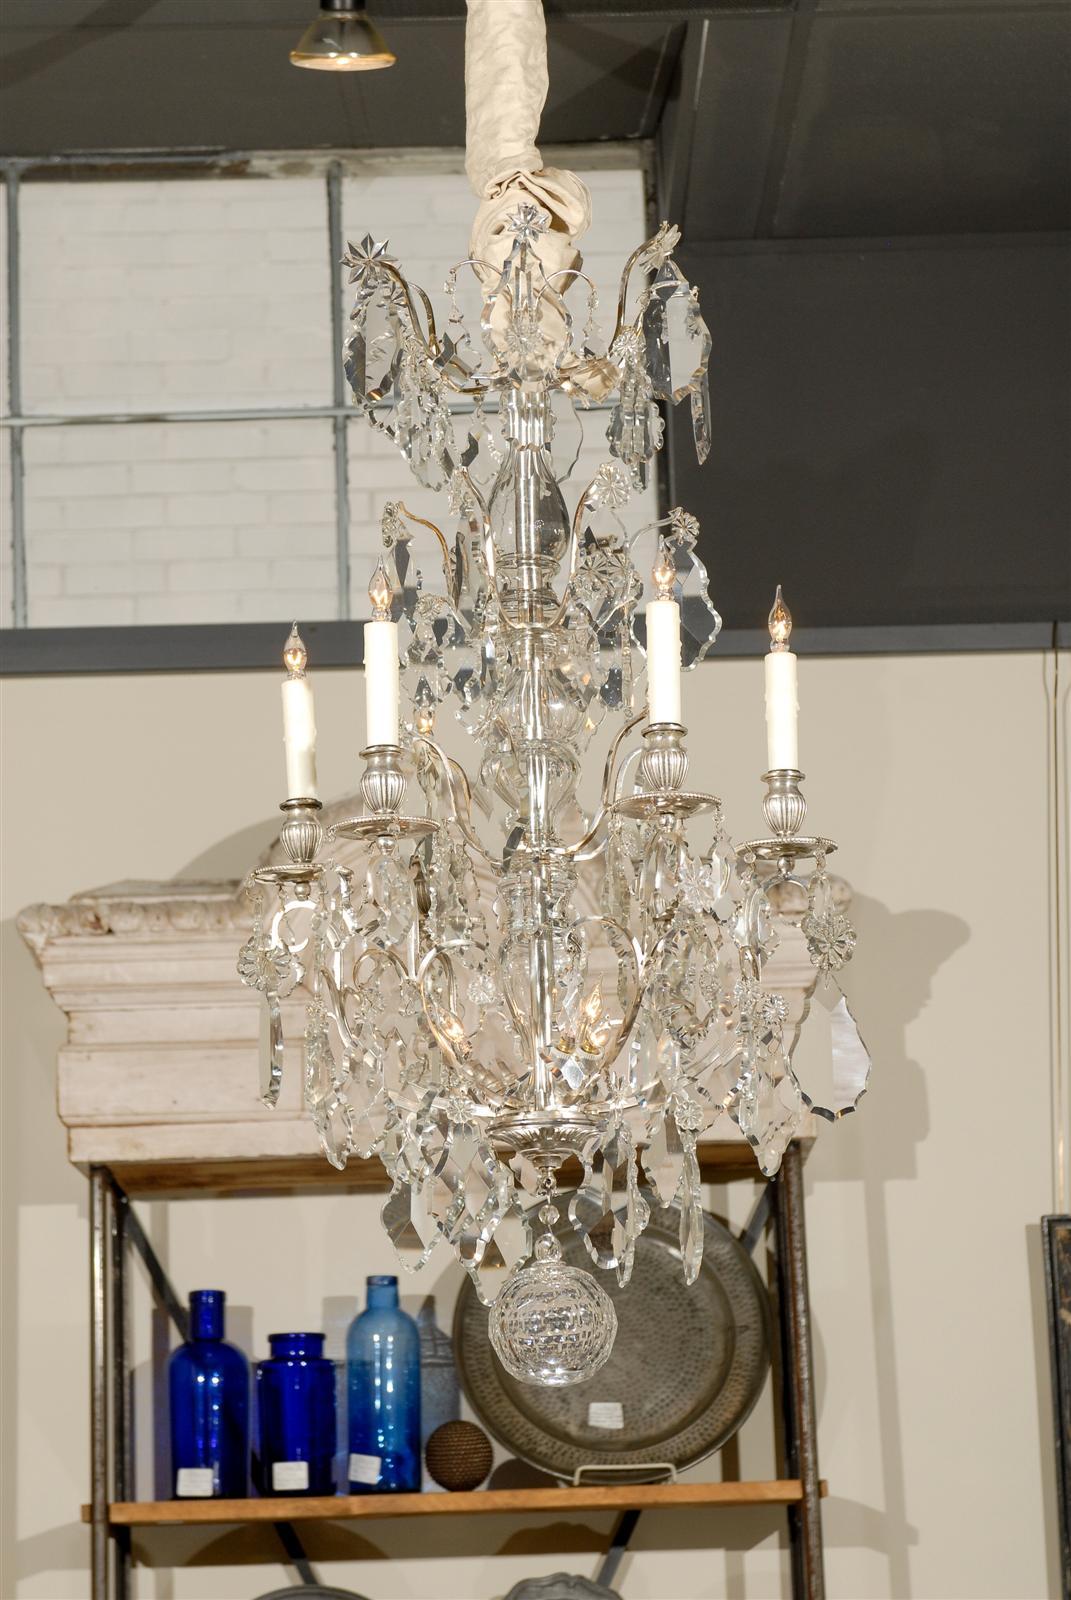 Vintage silvered bronze and crystal chandelier from France, circa 1900.
This chandelier has six arms and three small lights on the base so there can be a lot of light reflected from the gorgeous large crystals and the silvered surfaces of the cage.